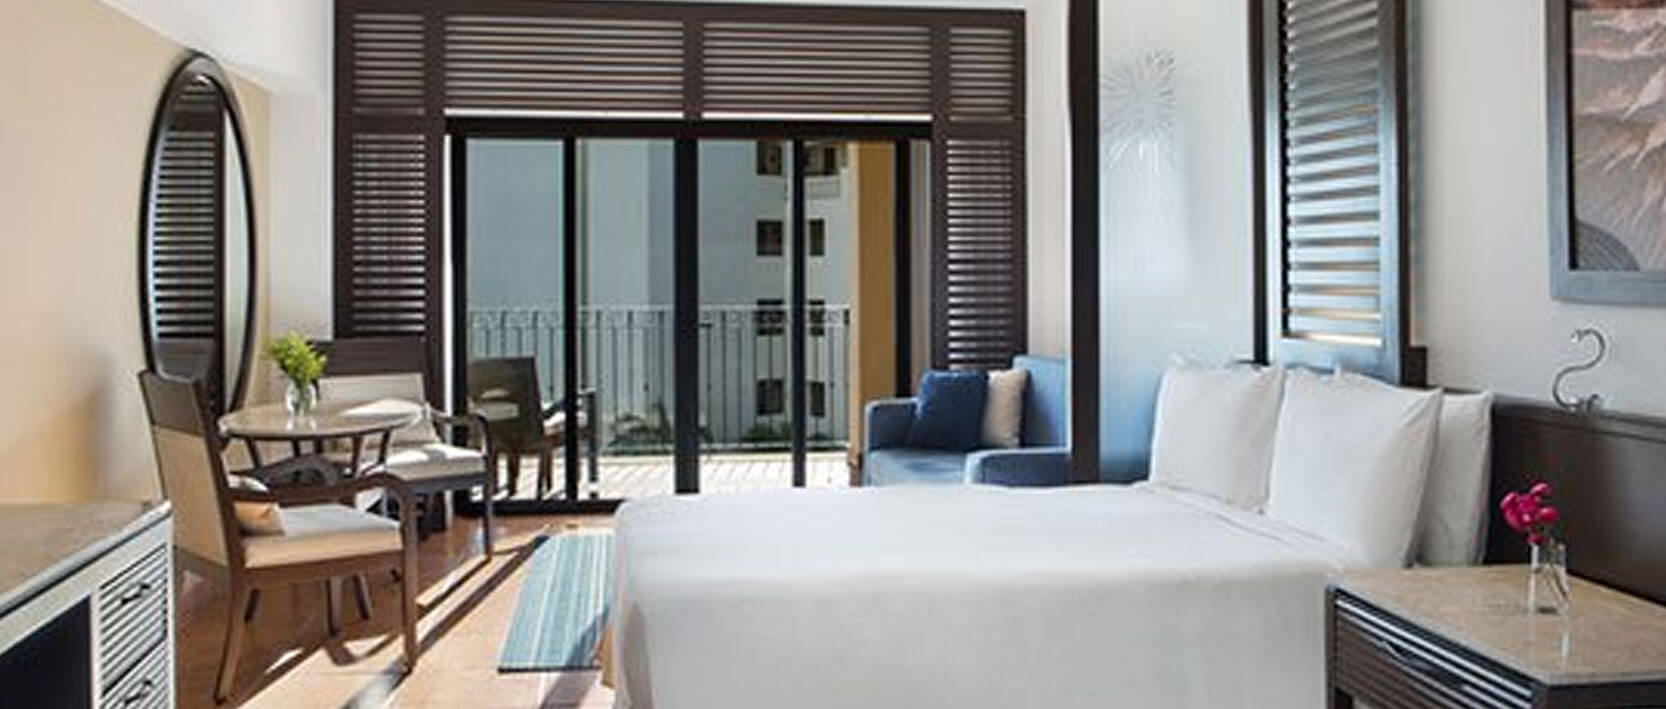 Hyatt Ziva Los Cabos Accommodations - Master King or Double Suite